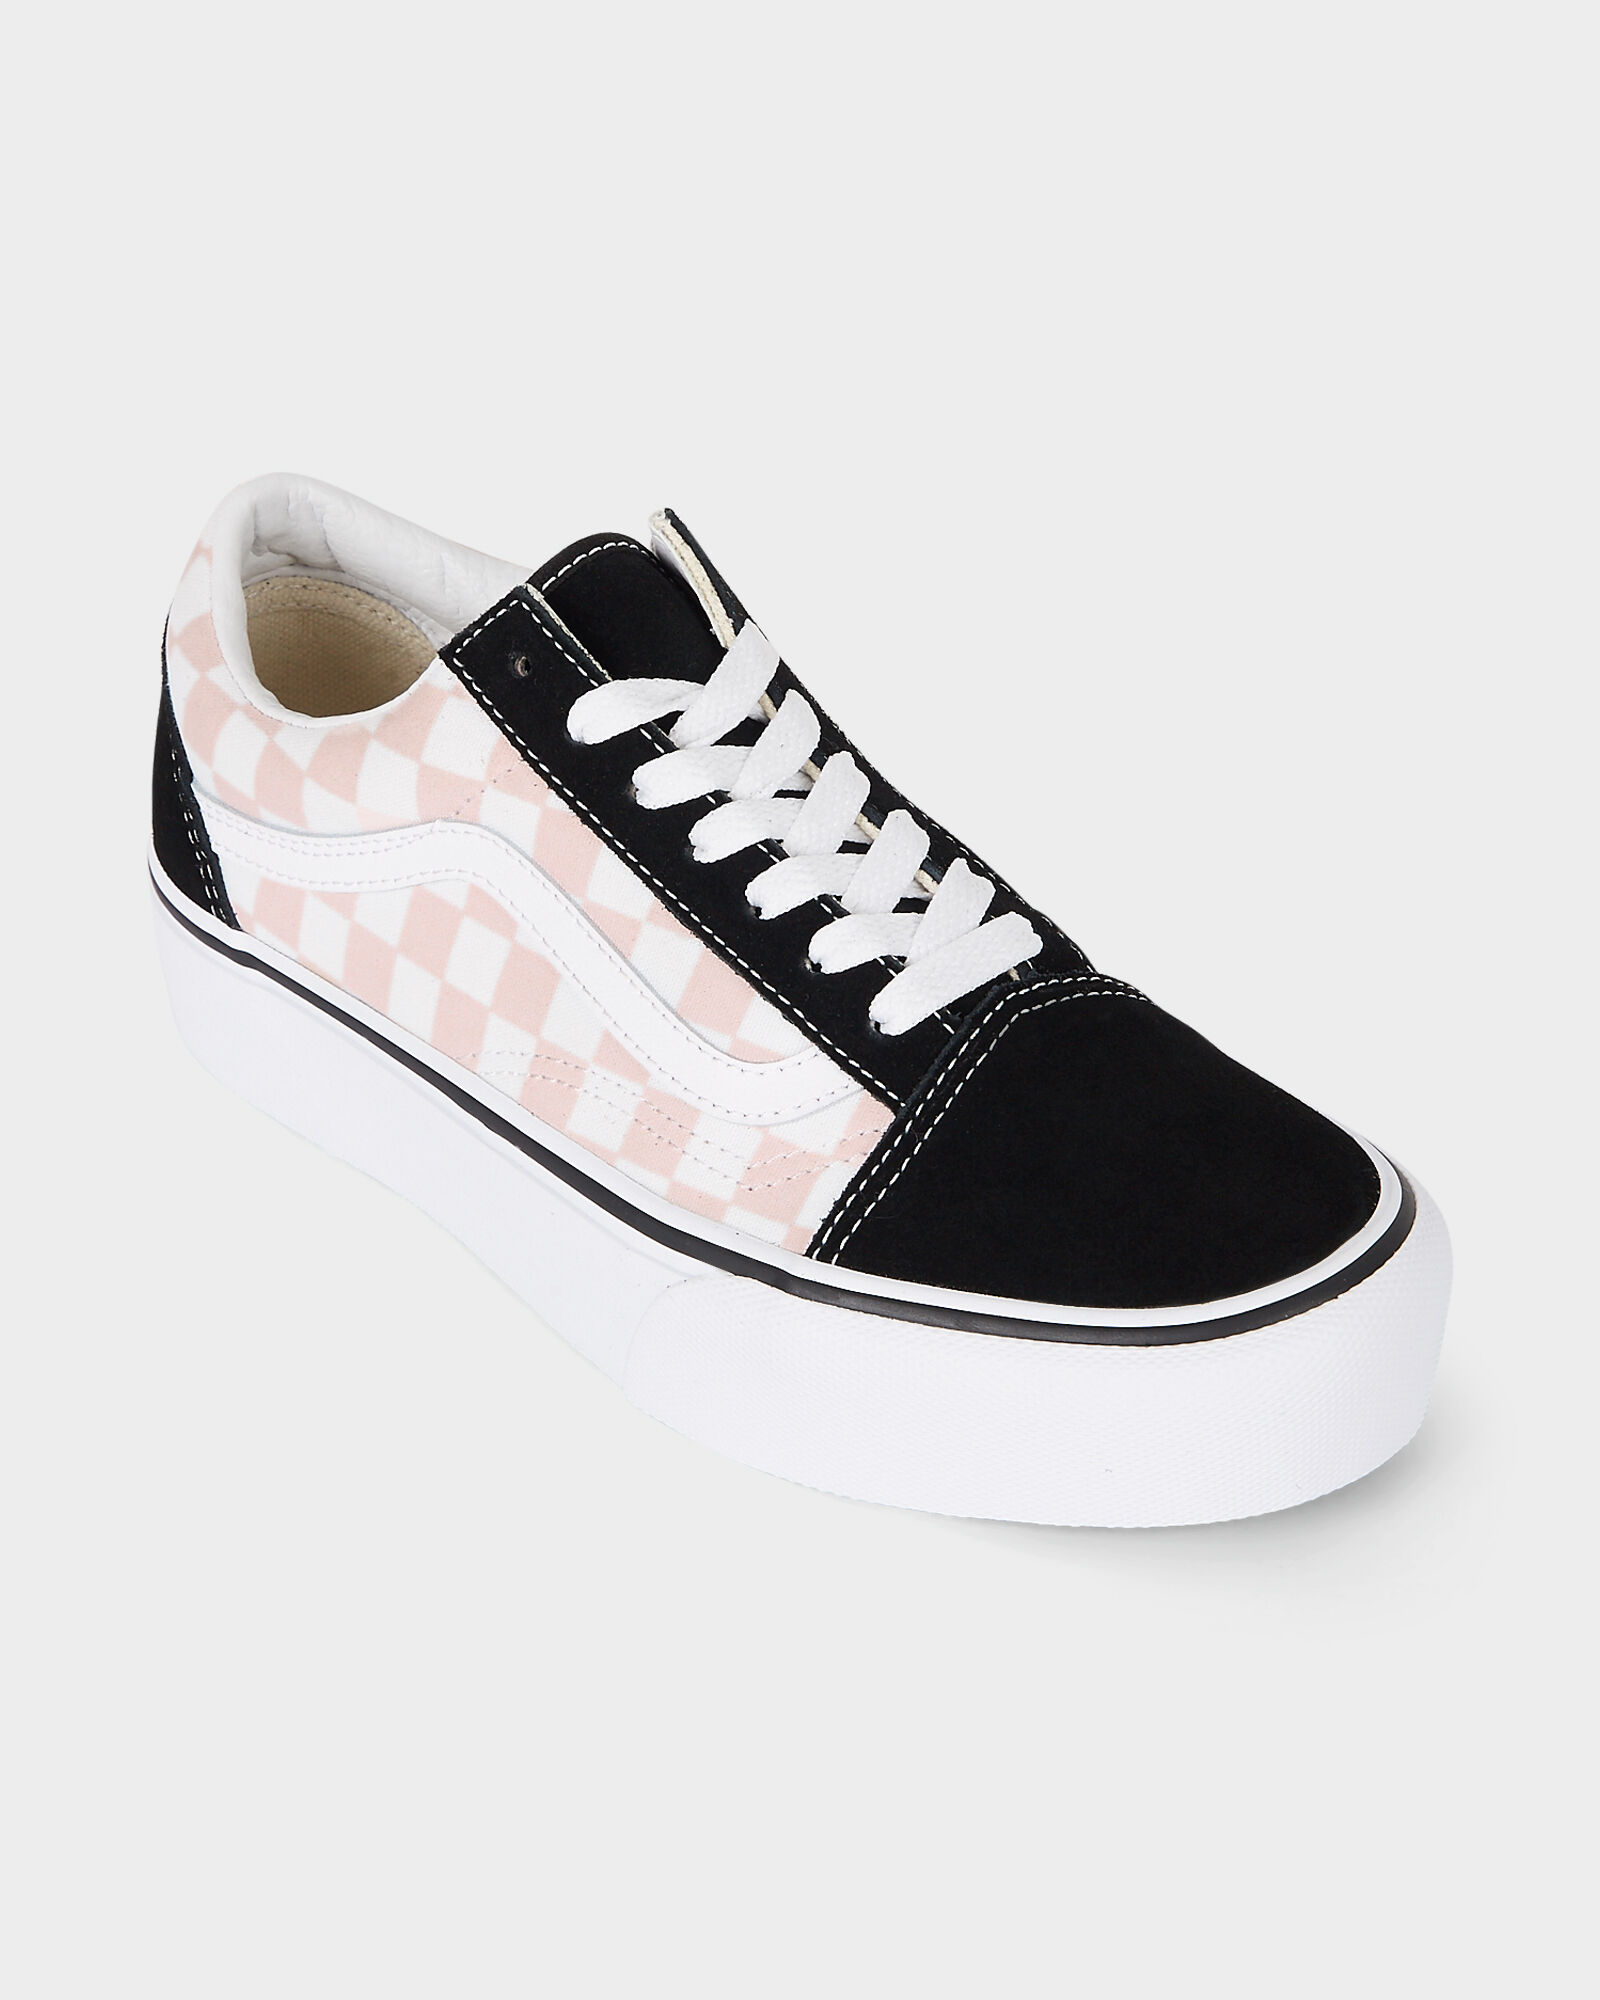 pink and white checkered vans old skool